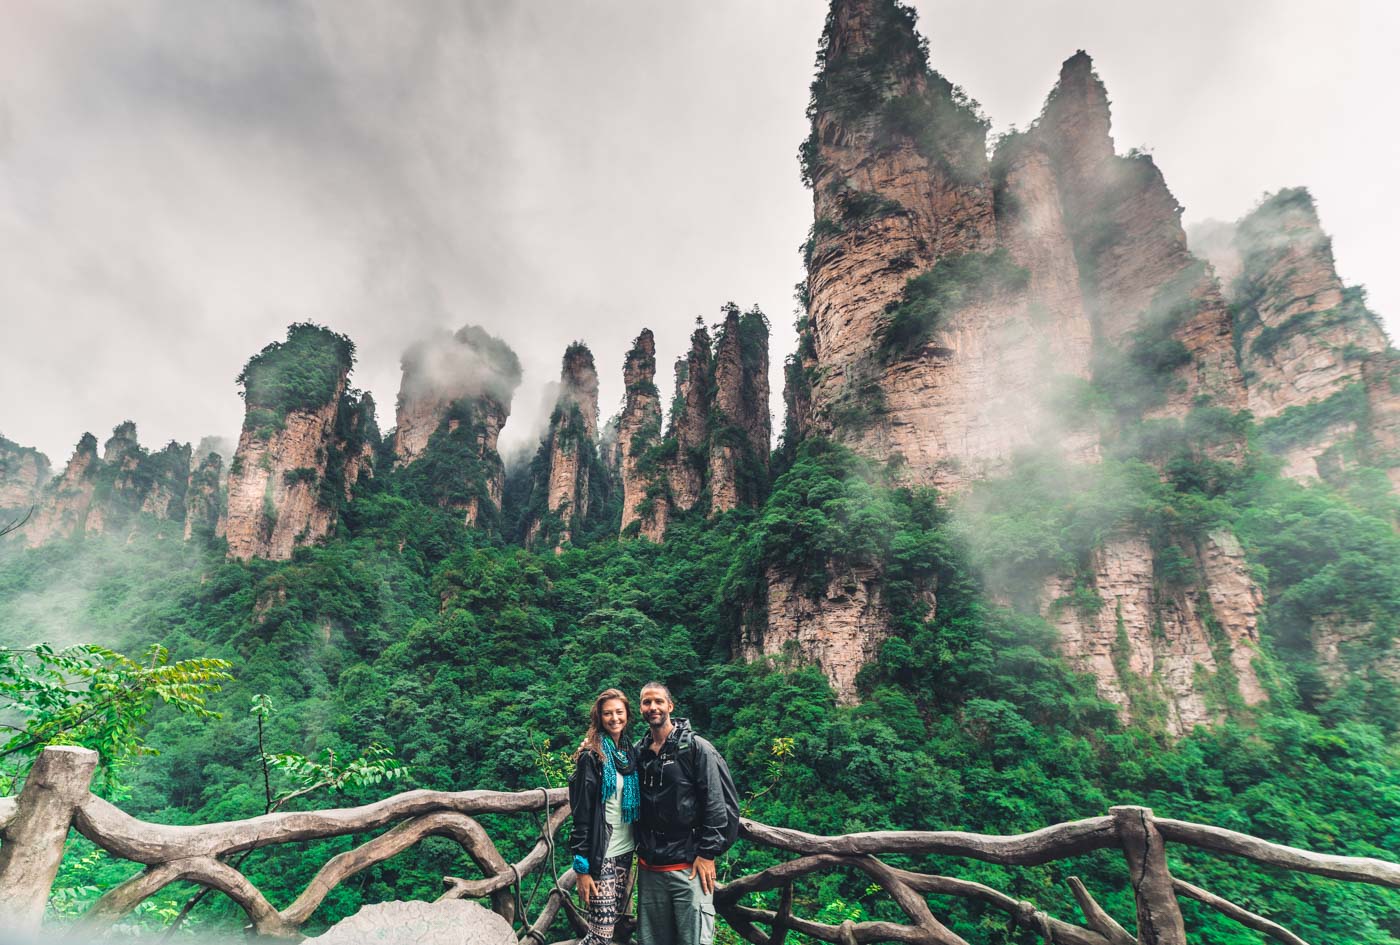 Guide to Visiting Zhangjiajie National Forest Park, the Avatar Mountain in China